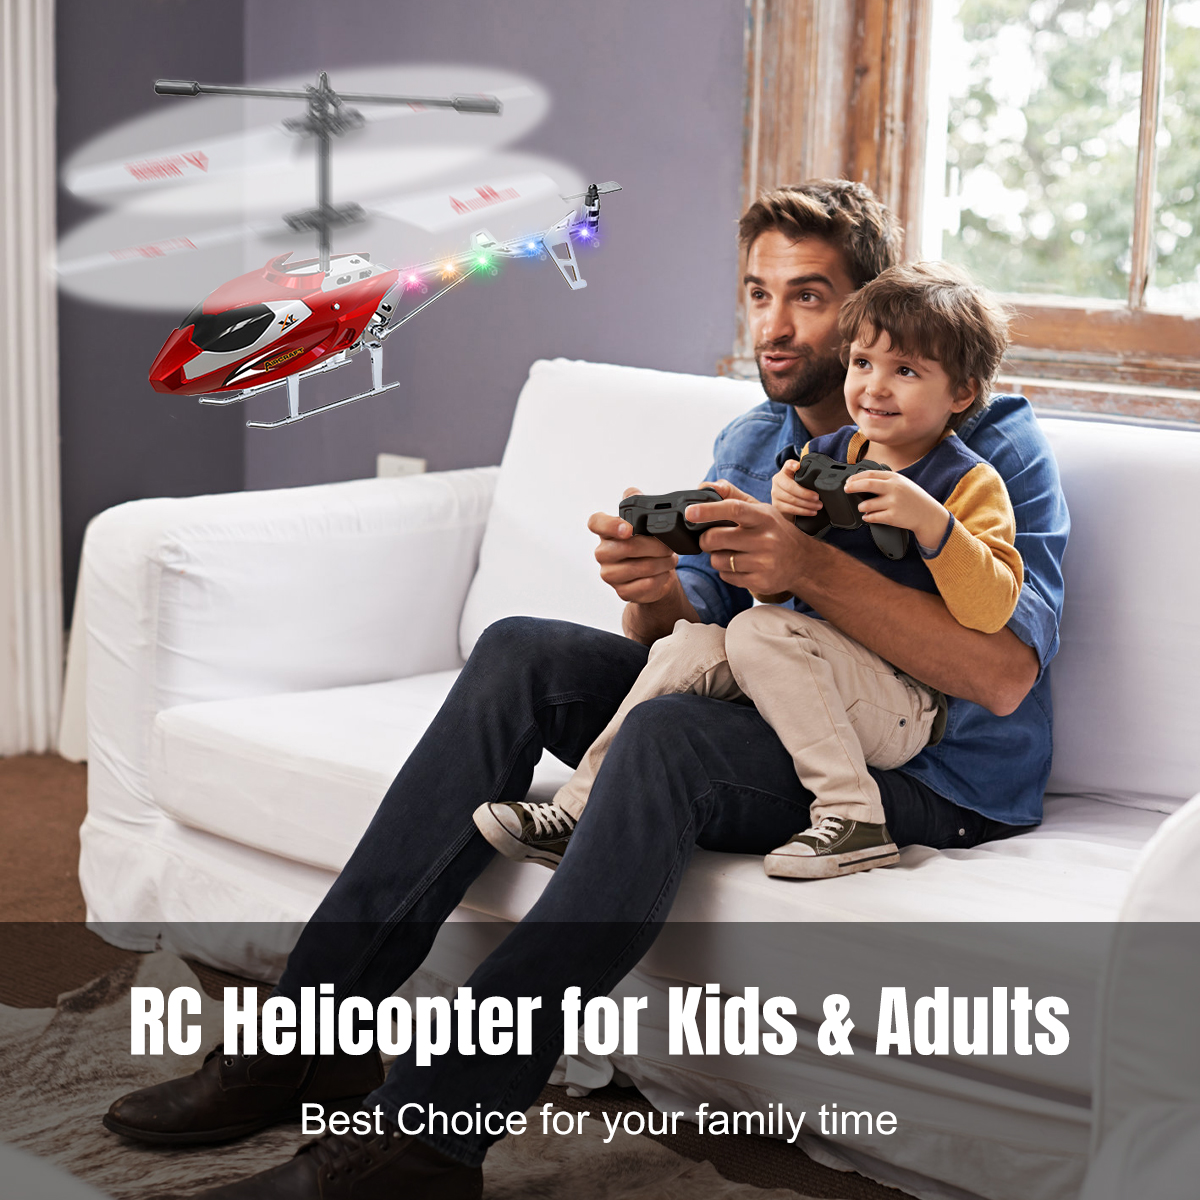 PayUSD Remote Control Helicopter Mini Gyroscope RC Helicopters LED Light for Indoor to Fly for Kids and Beginners, Red - image 2 of 8